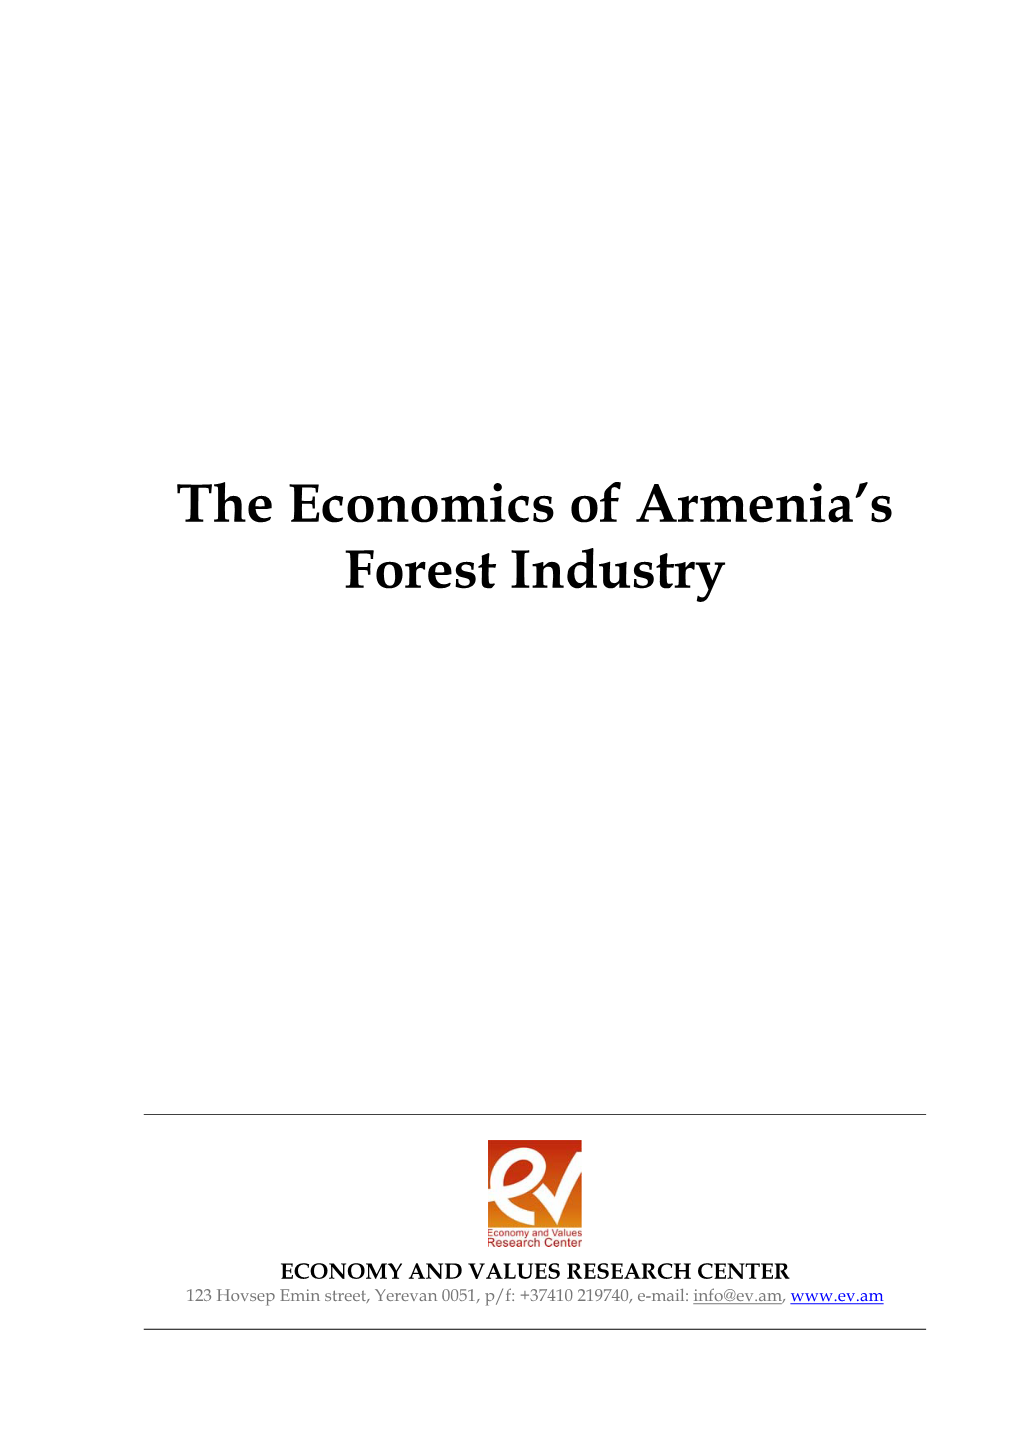 The Economics of Armenia's Forest Industry